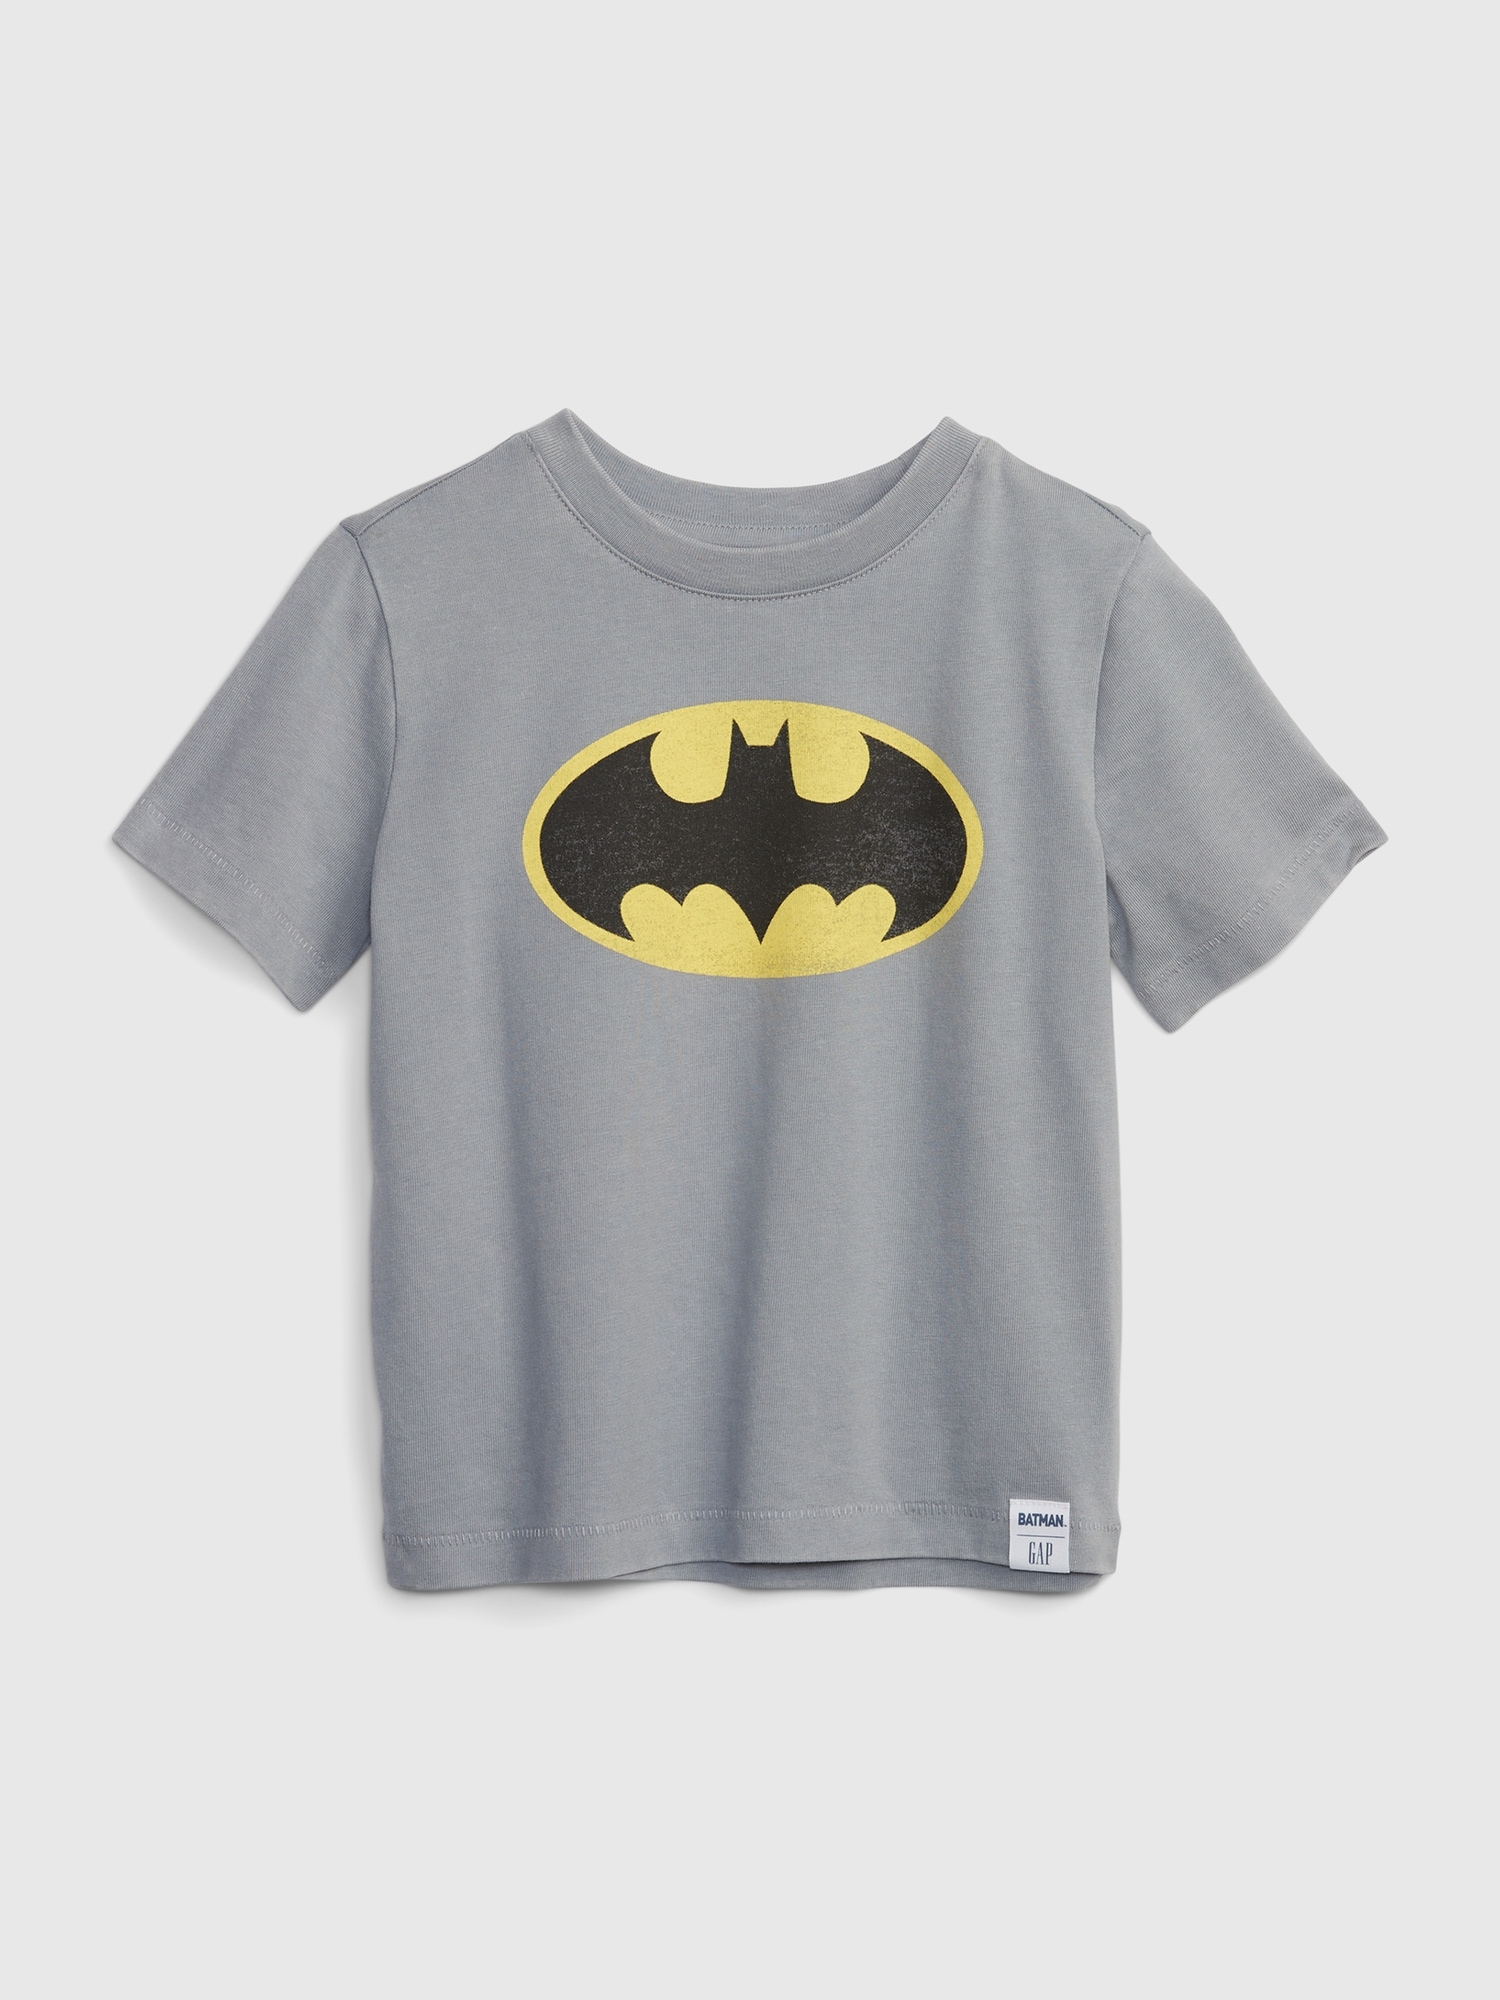 Batman Ladies Shirt with Cape - Size Small - clothing